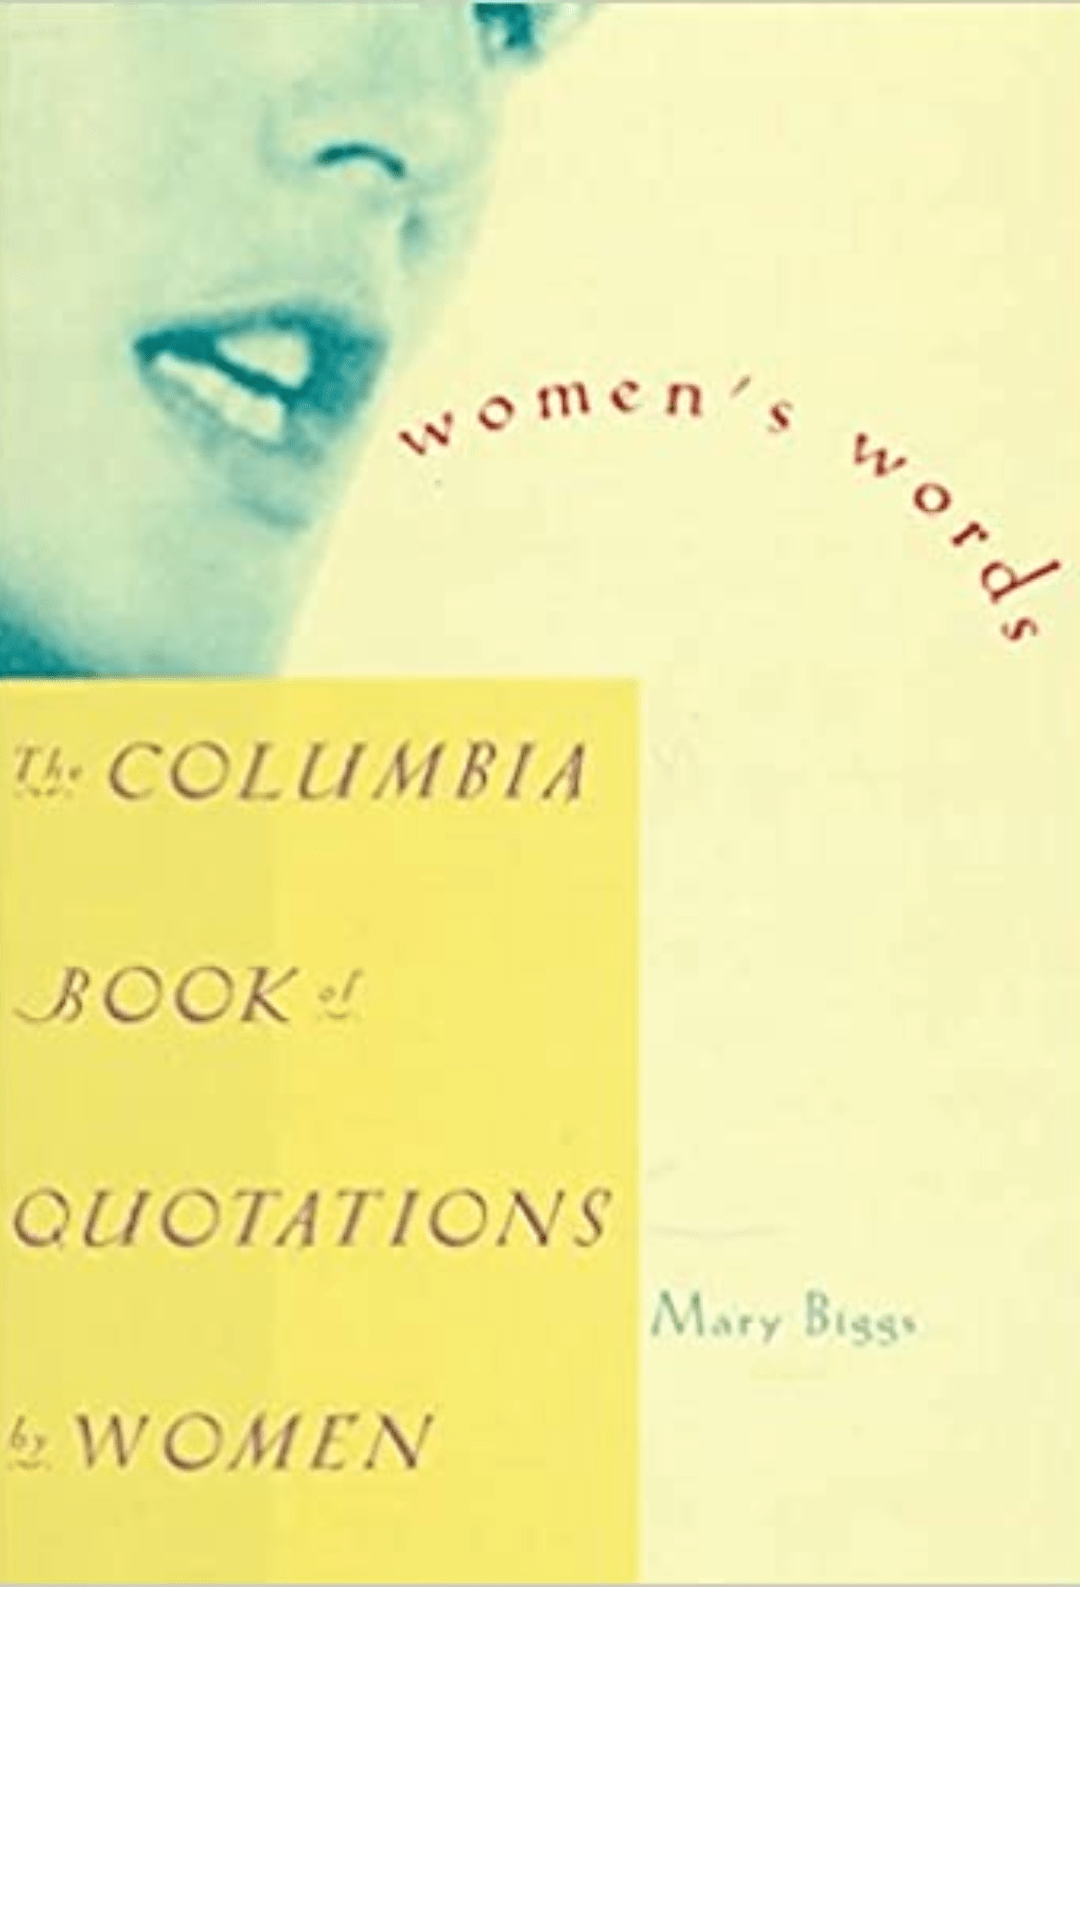 Women's Words : The Columbia Book of Quotations by Women